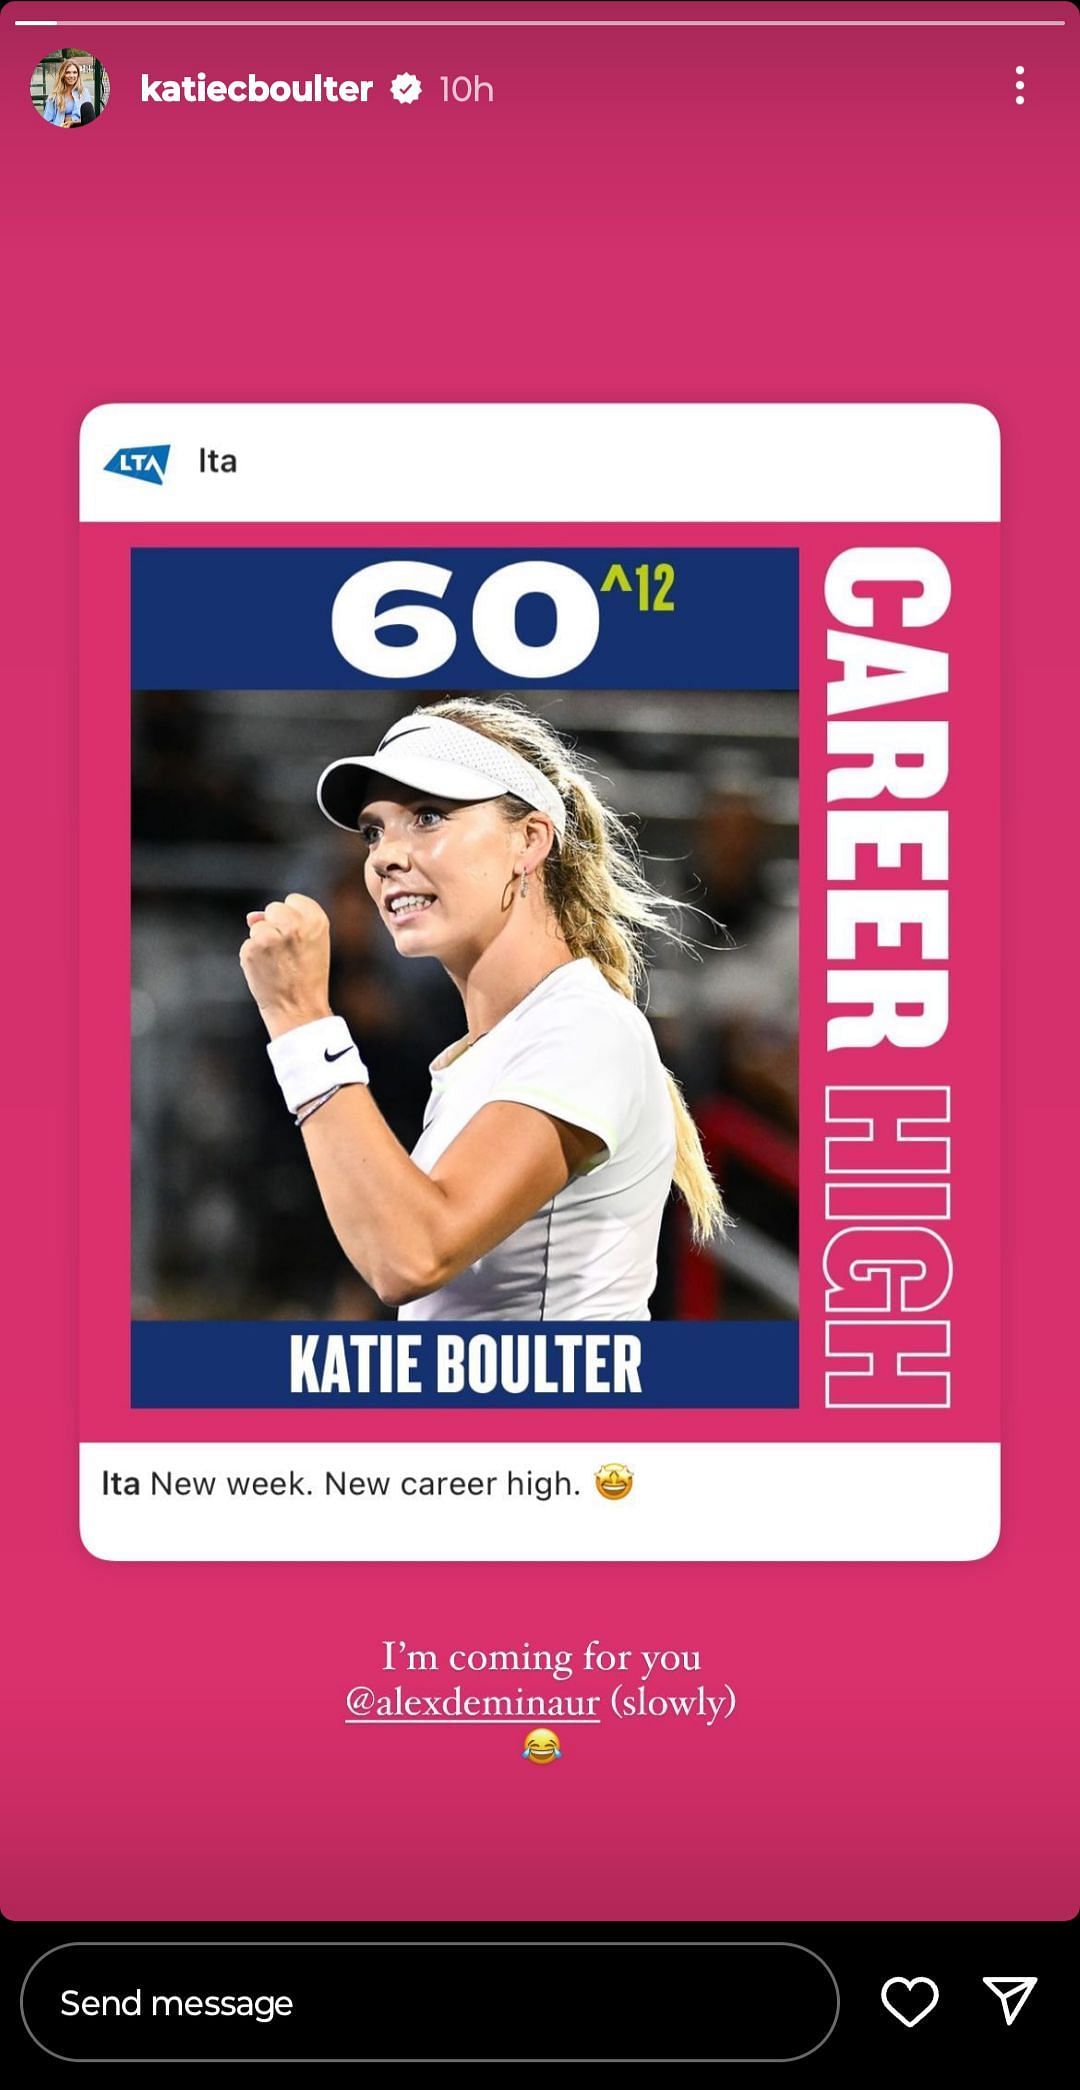 Katie Boulter adds to her Instagram story